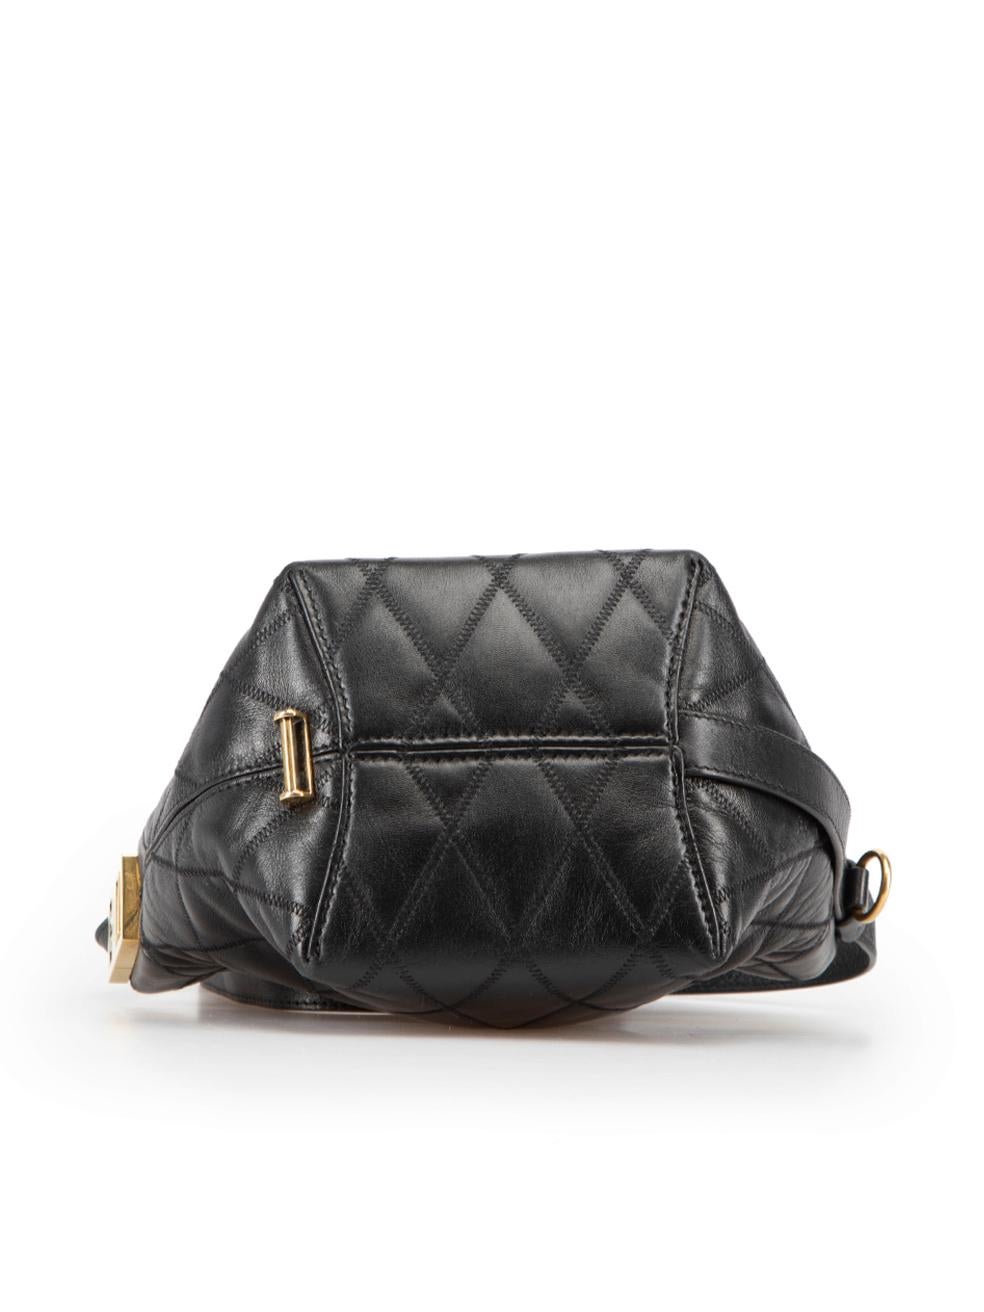 Givenchy Women's Black Leather GV Quilted Bucket Bag For Sale 1